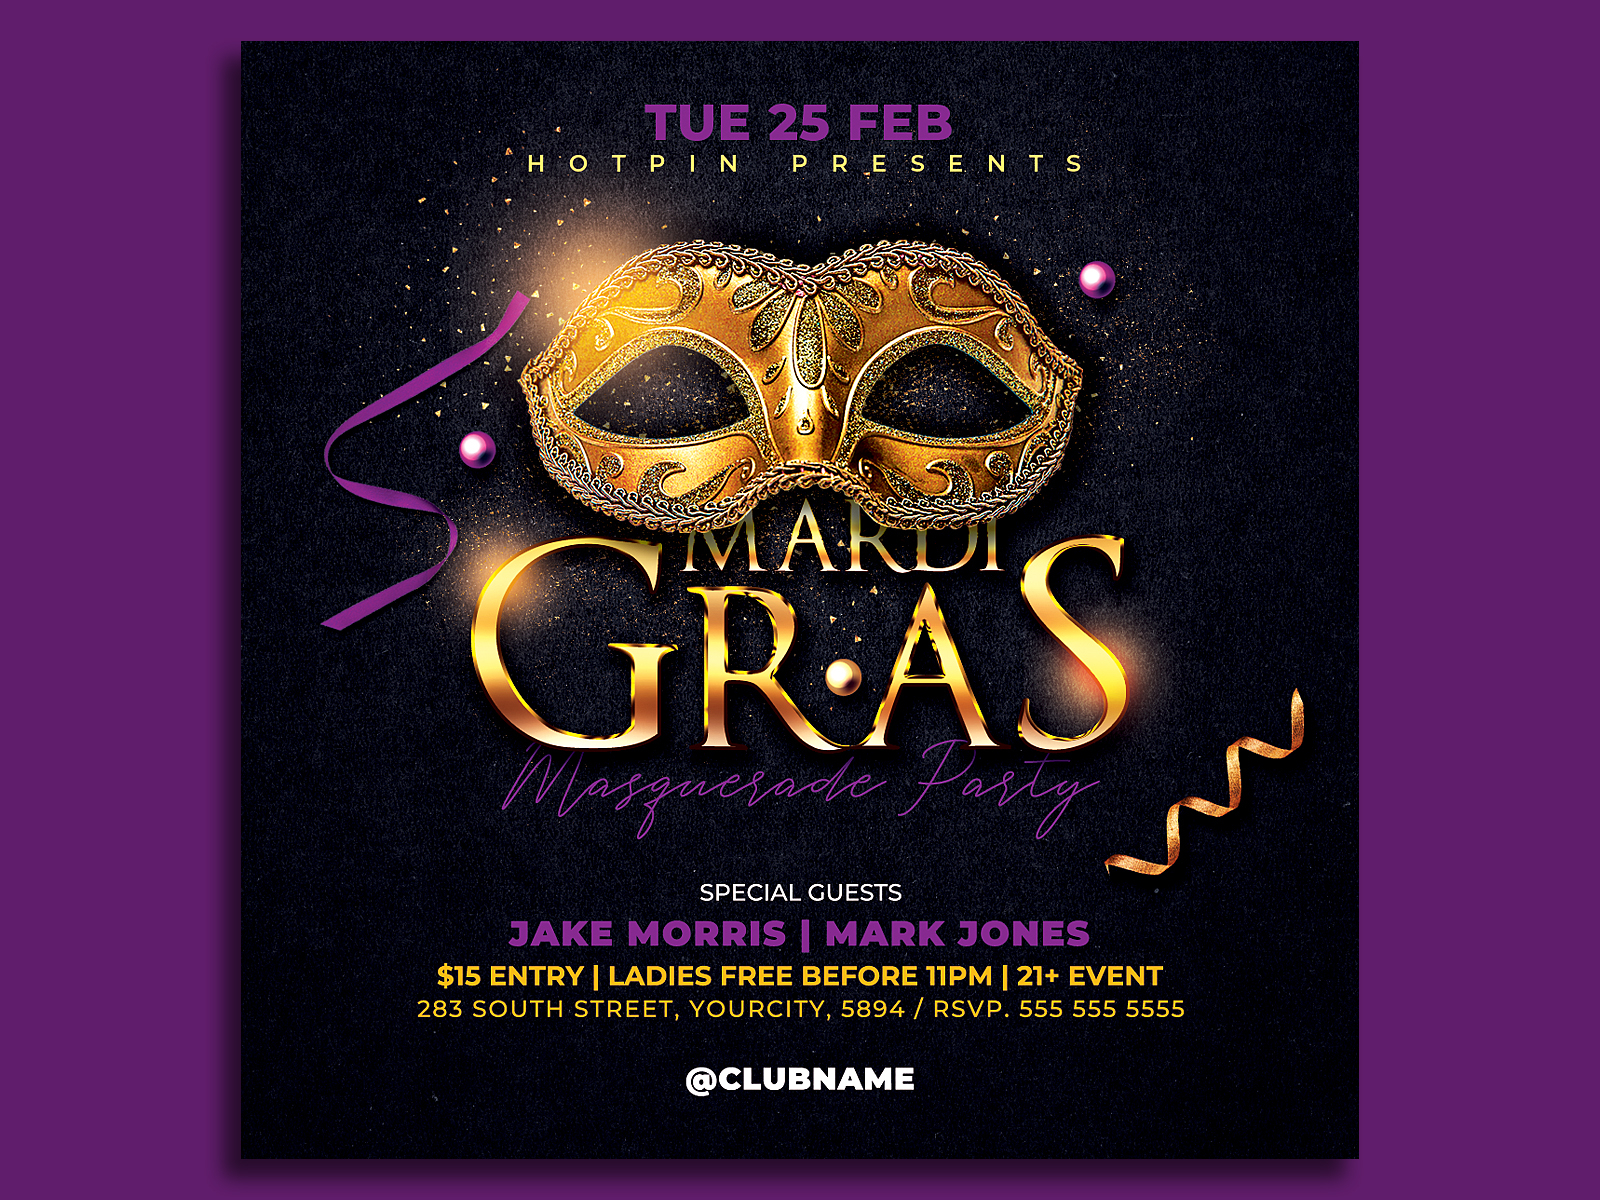 mardi-gras-flyer-template-by-hotpin-on-dribbble